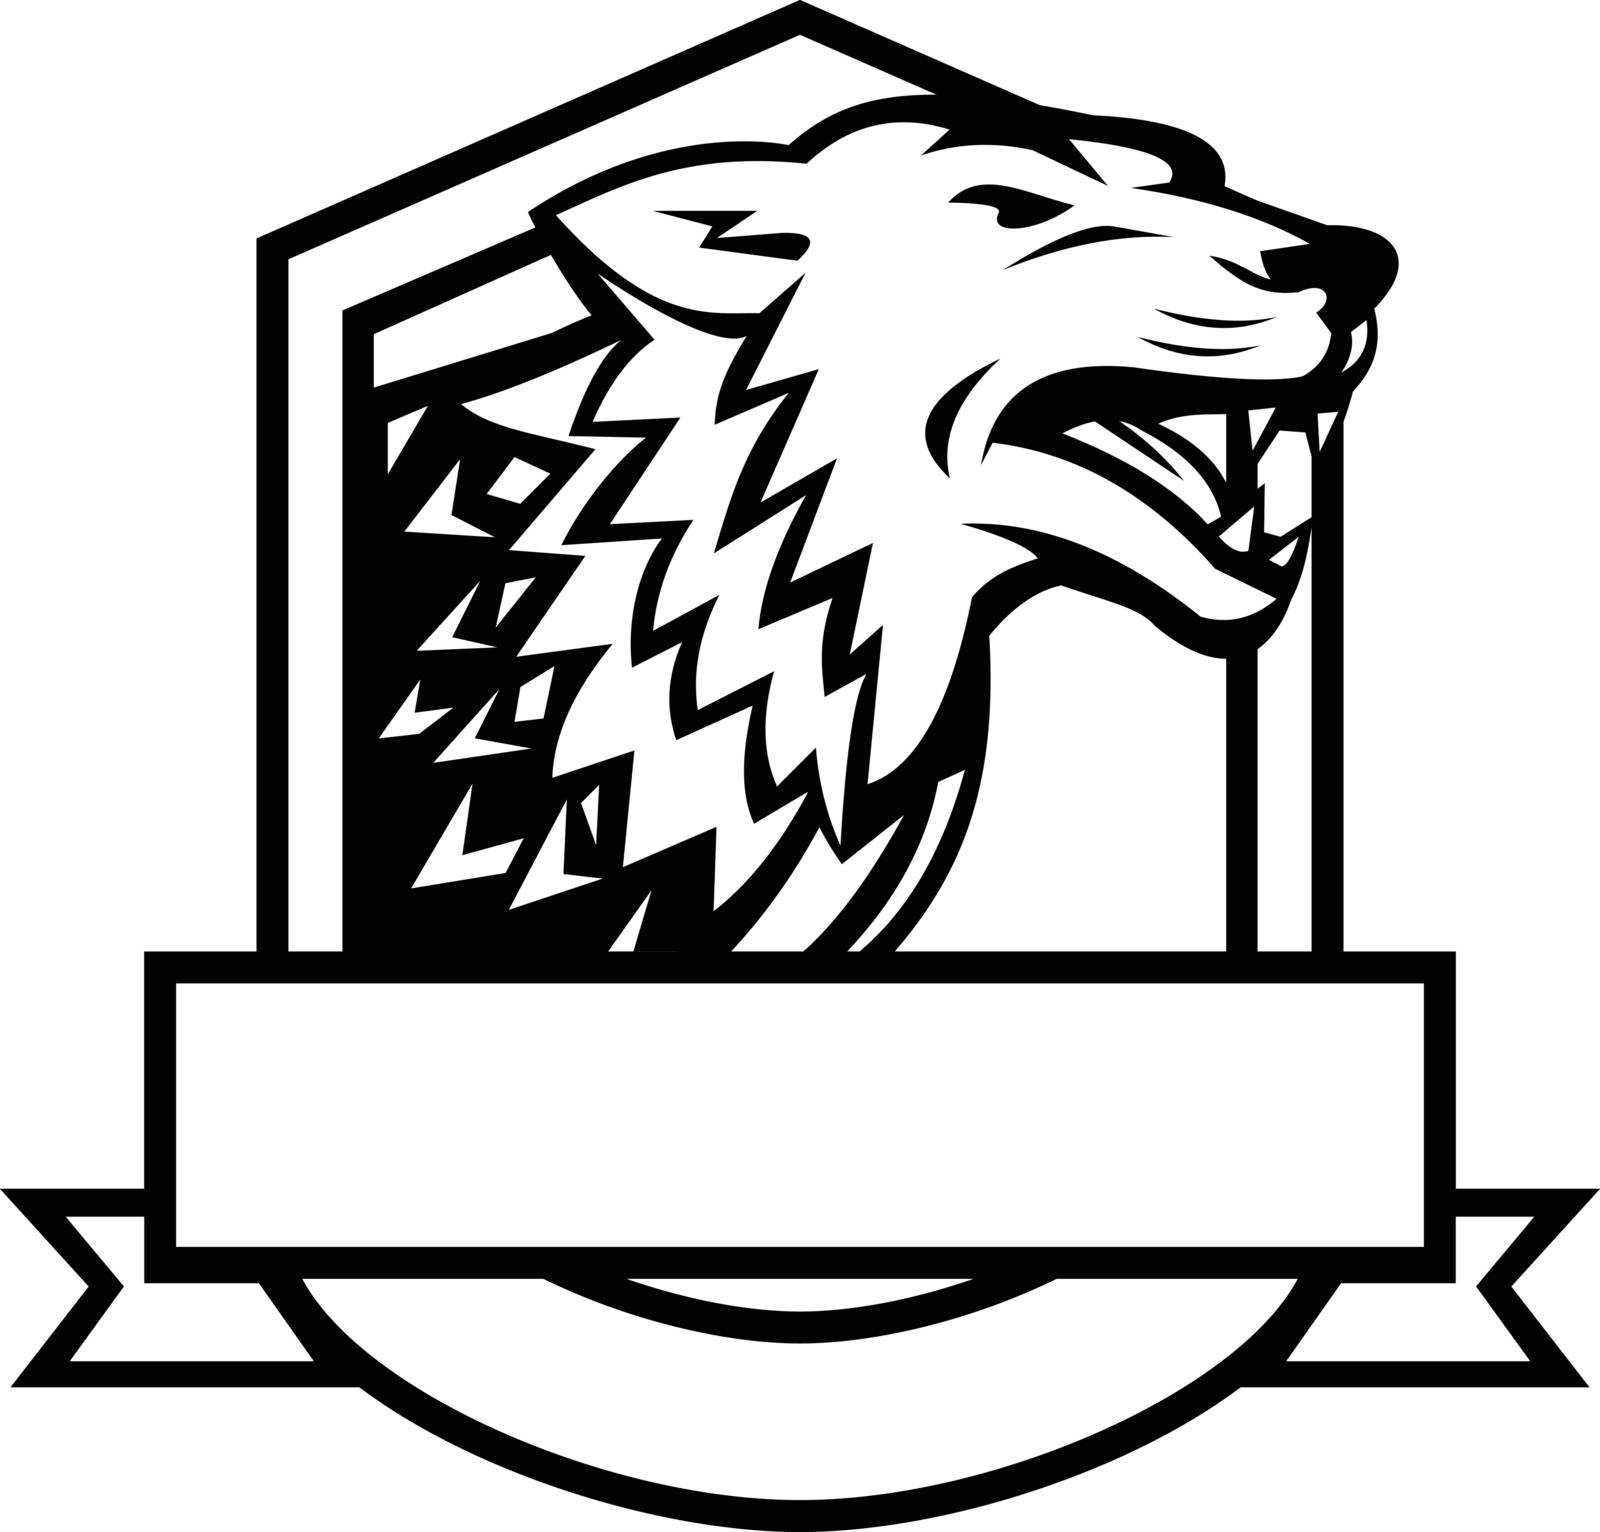 Retro style illustration of an angry wolf growling set inside crest shield with banner done in black and white on isolated background.